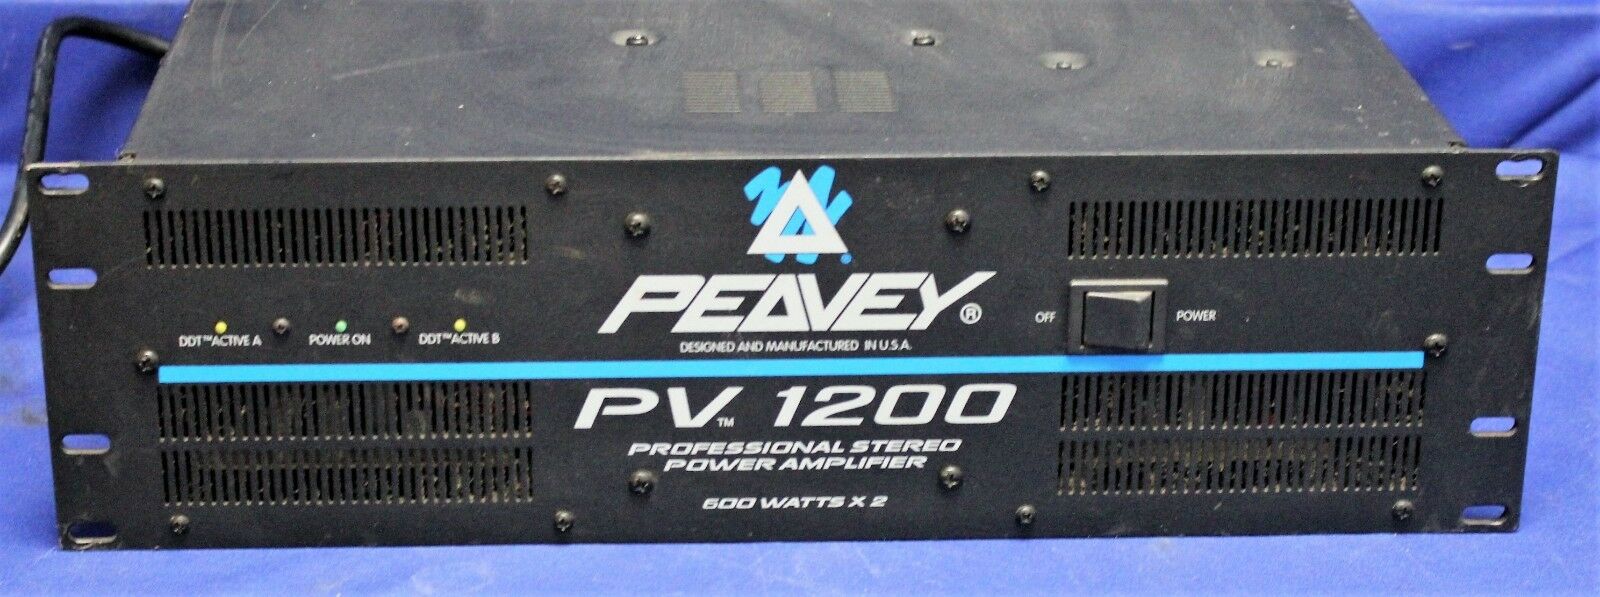 Peavey PV 1200 Professional Stereo Power Amplifier